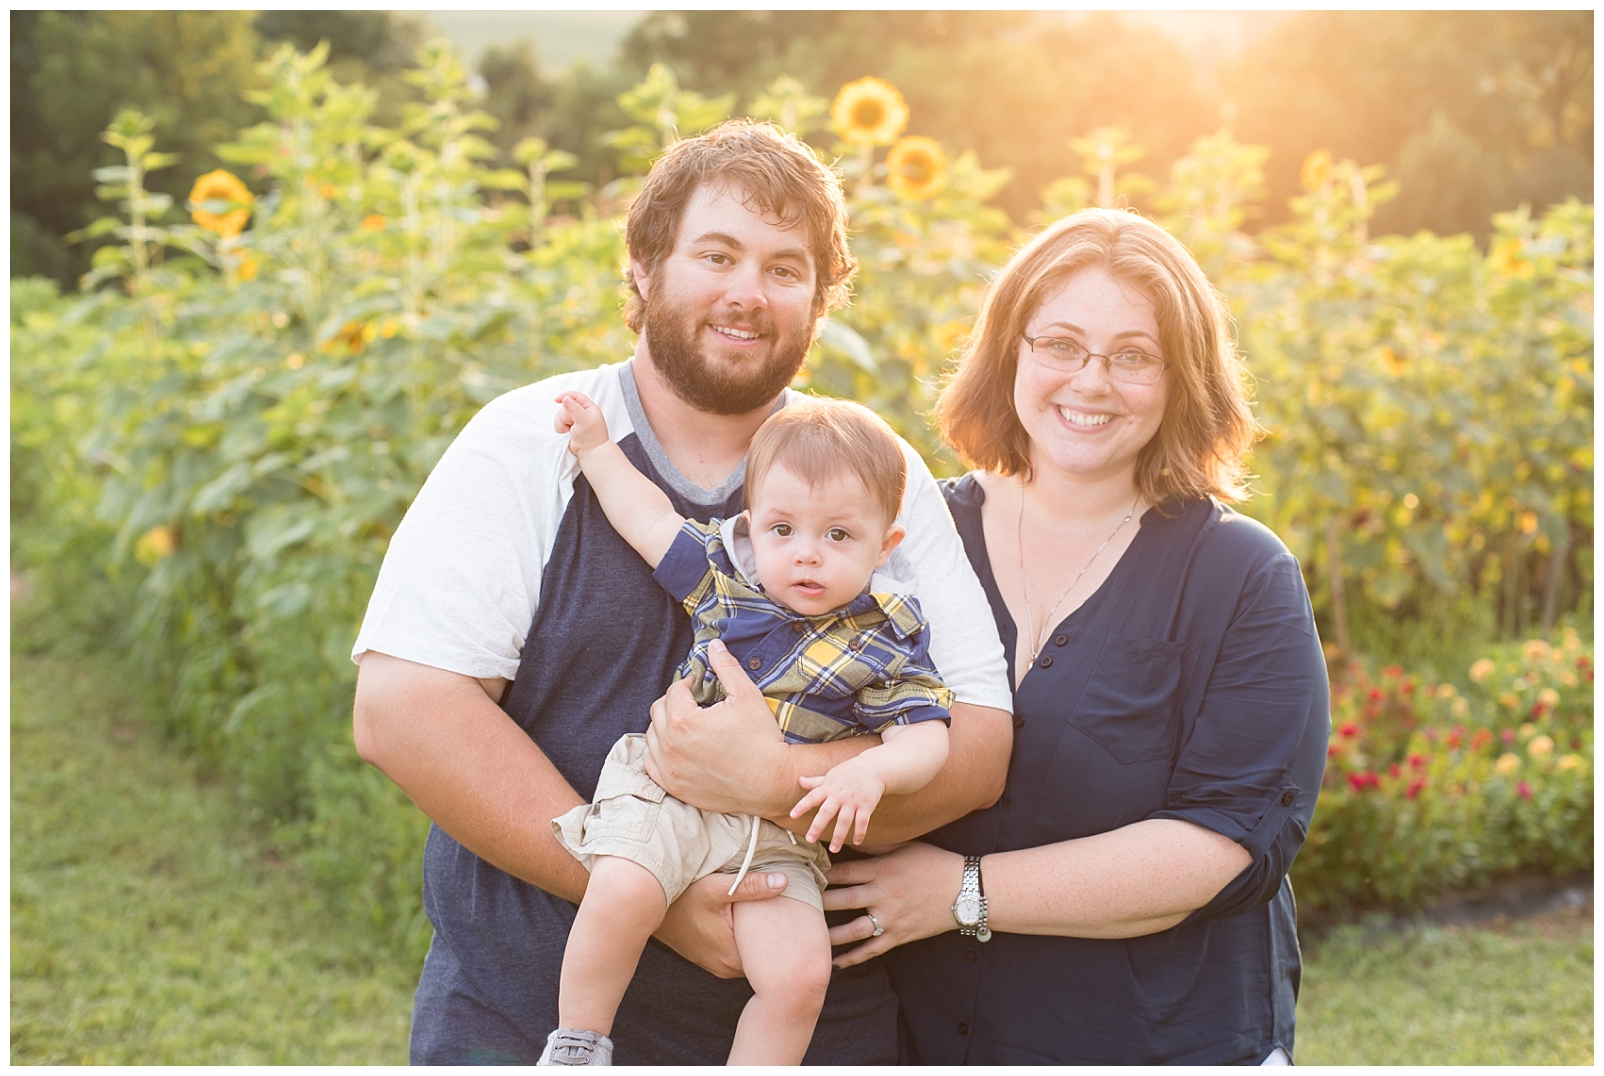 Sunflower field sunset with family of three smiling